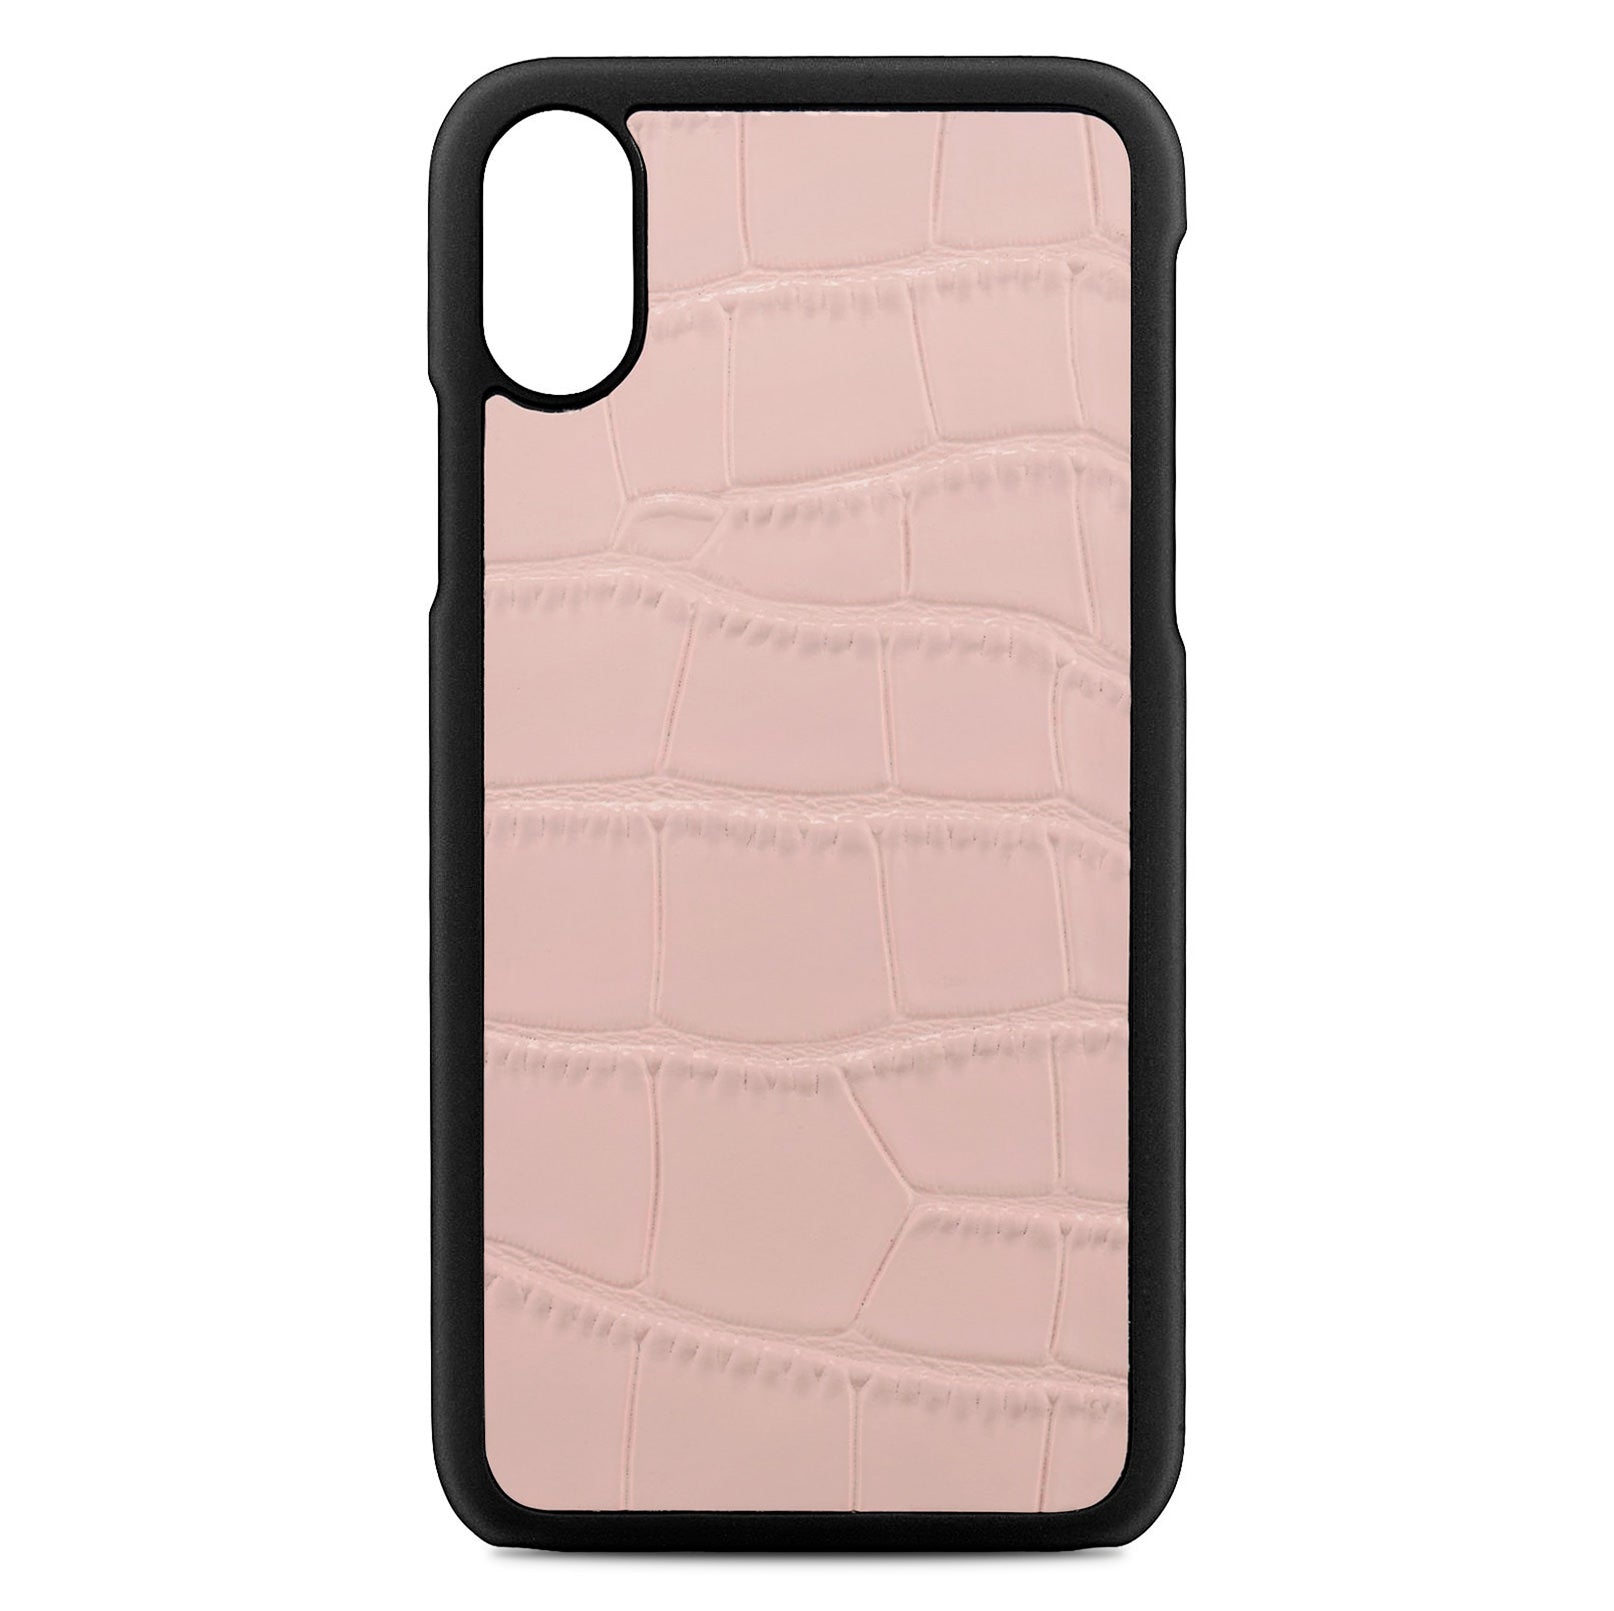 Blank Personalised Pink Croc Leather iPhone X Case